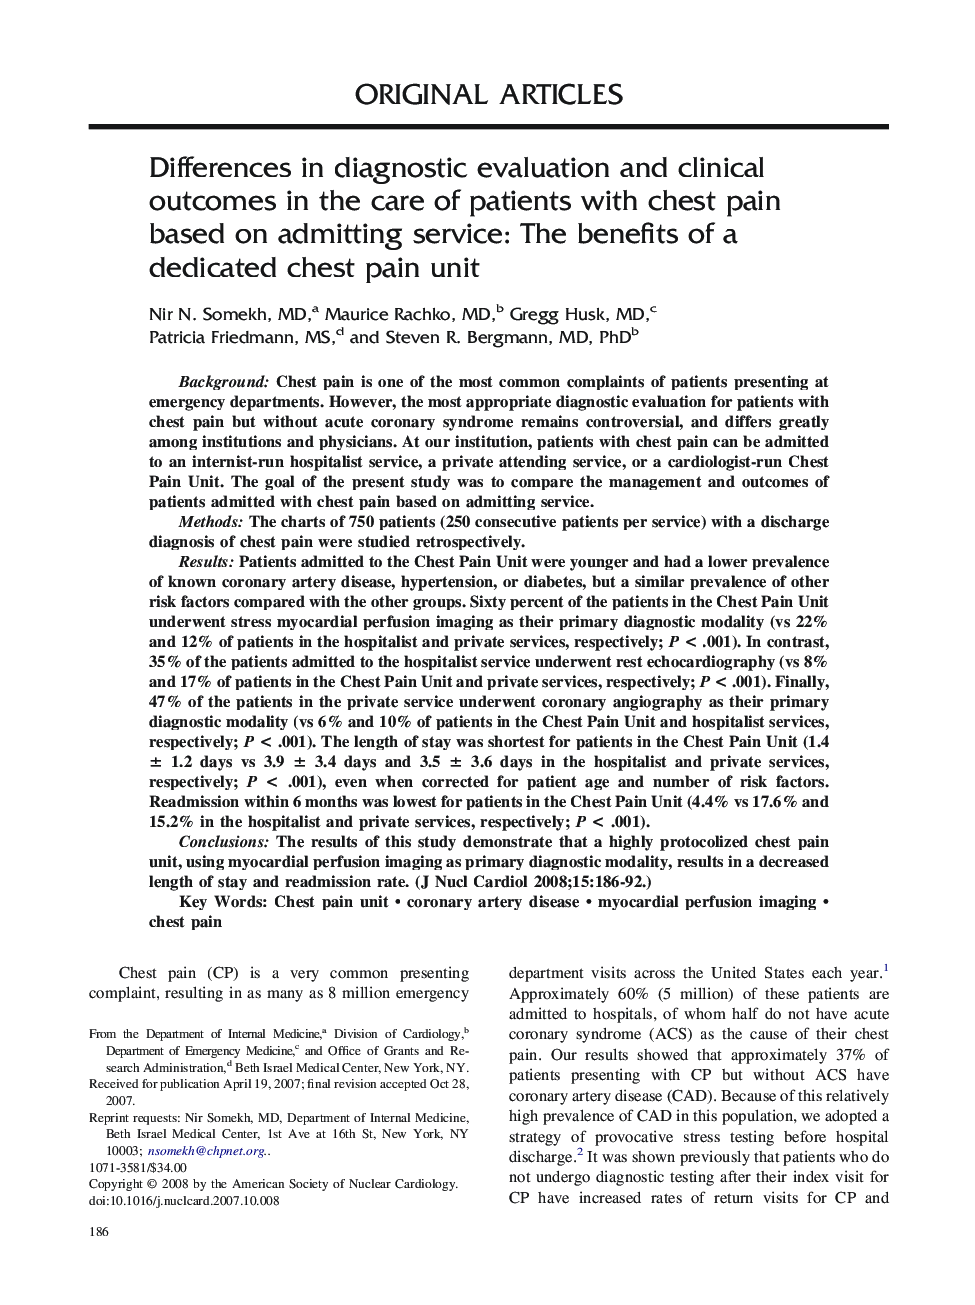 Differences in diagnostic evaluation and clinical outcomes in the care of patients with chest pain based on admitting service: The benefits of a dedicated chest pain unit